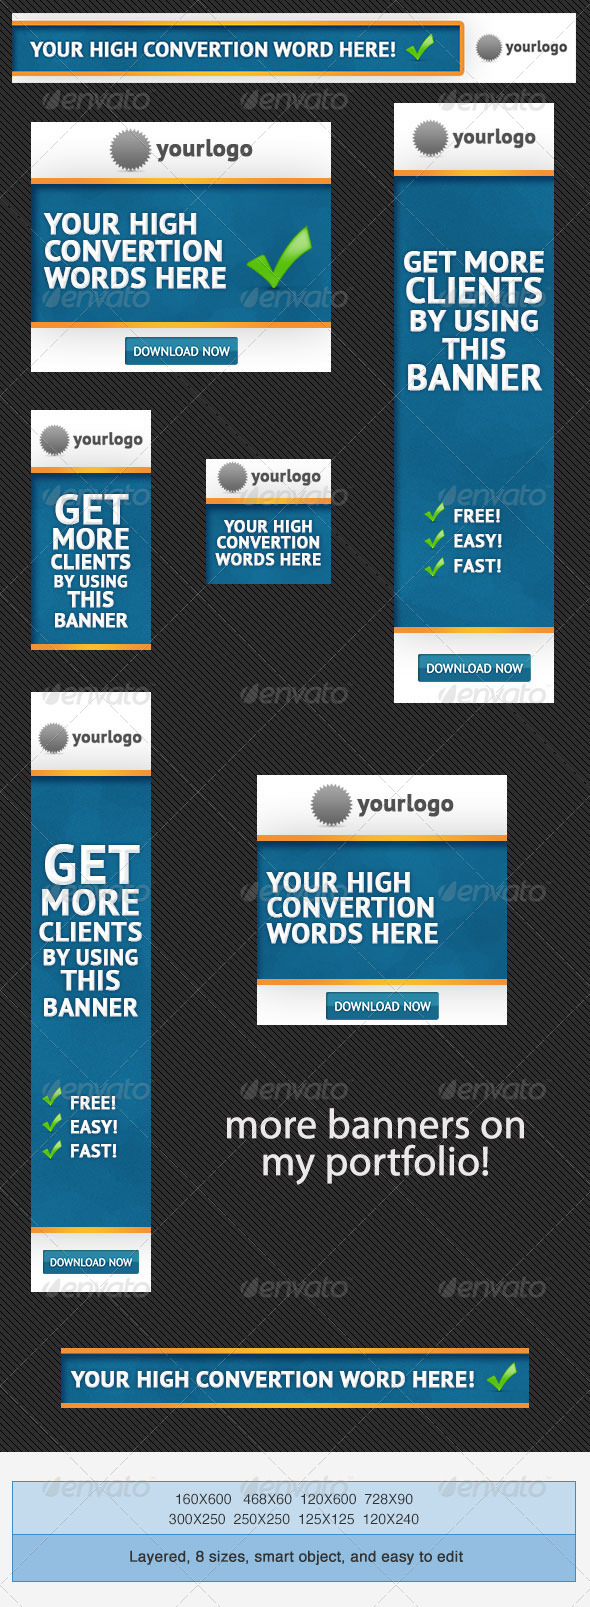 Template for Business Ad Banners